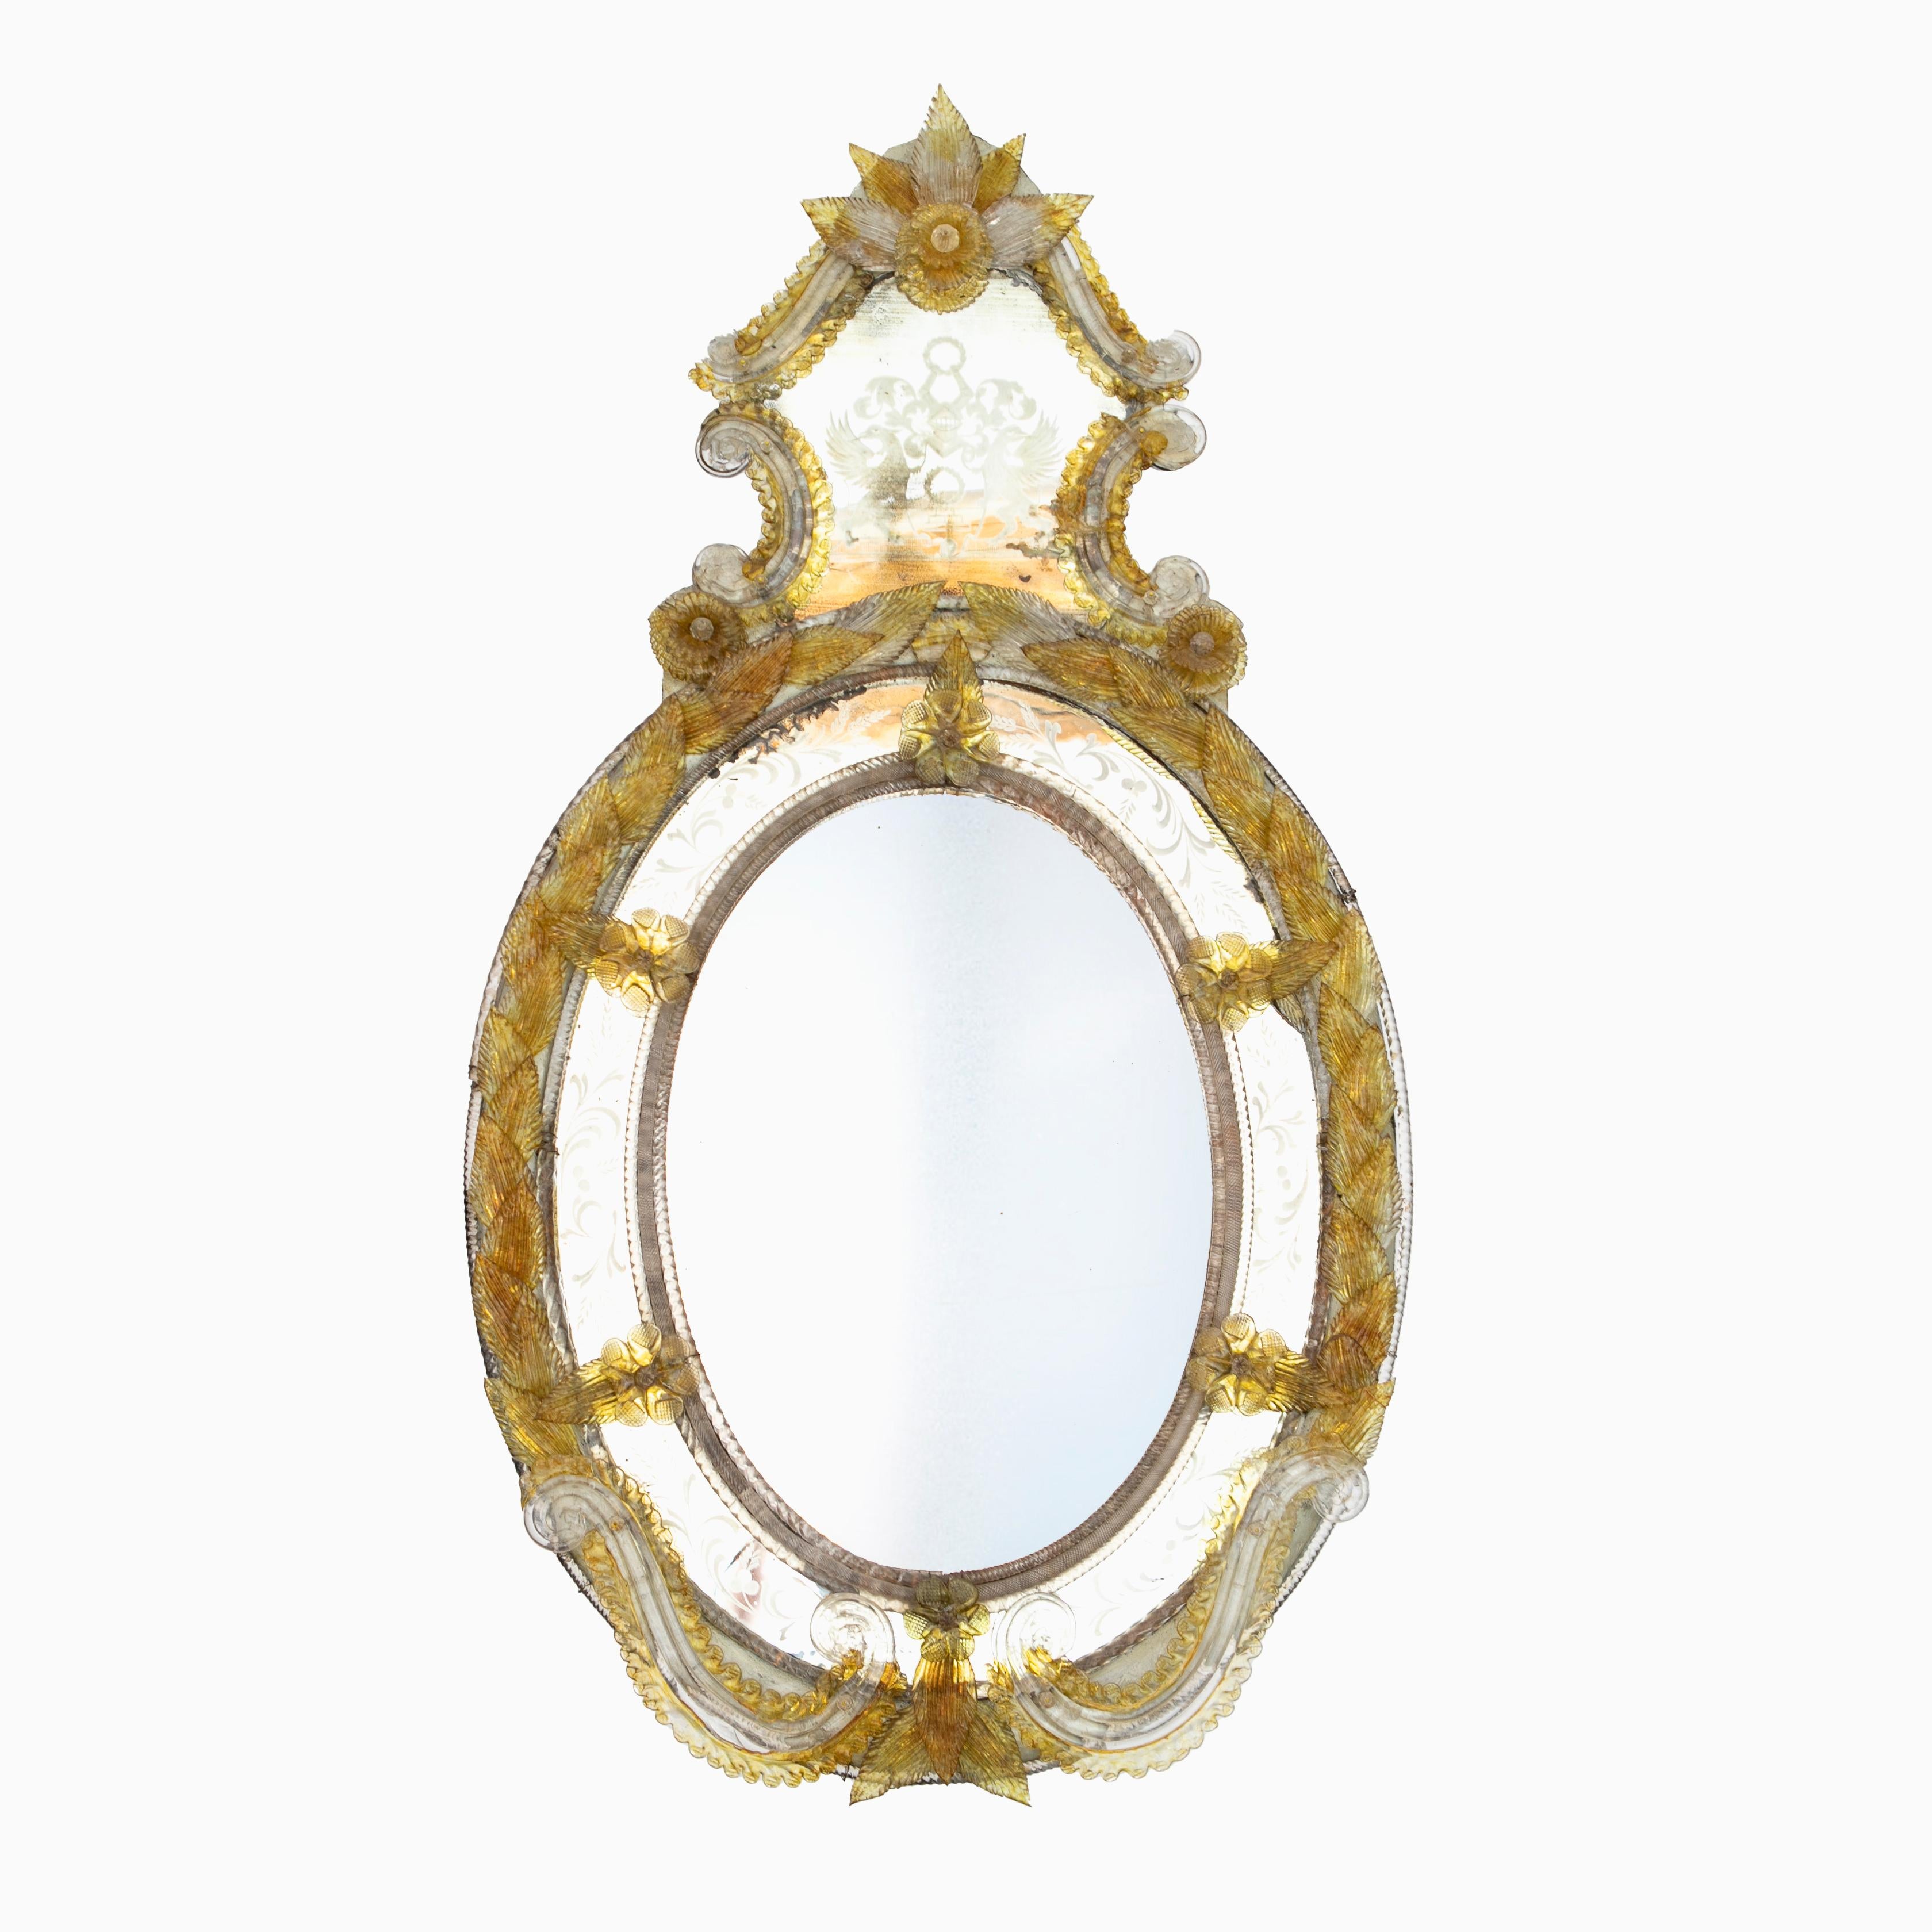 Large Italian Murano Mirror from the late 19th century featuring a yellow and clear glass molded foliate border.

Oval faceted mirror surrounded by a frame with hand engravings. At the top a mirror with an engraved badge of nobility in the form of